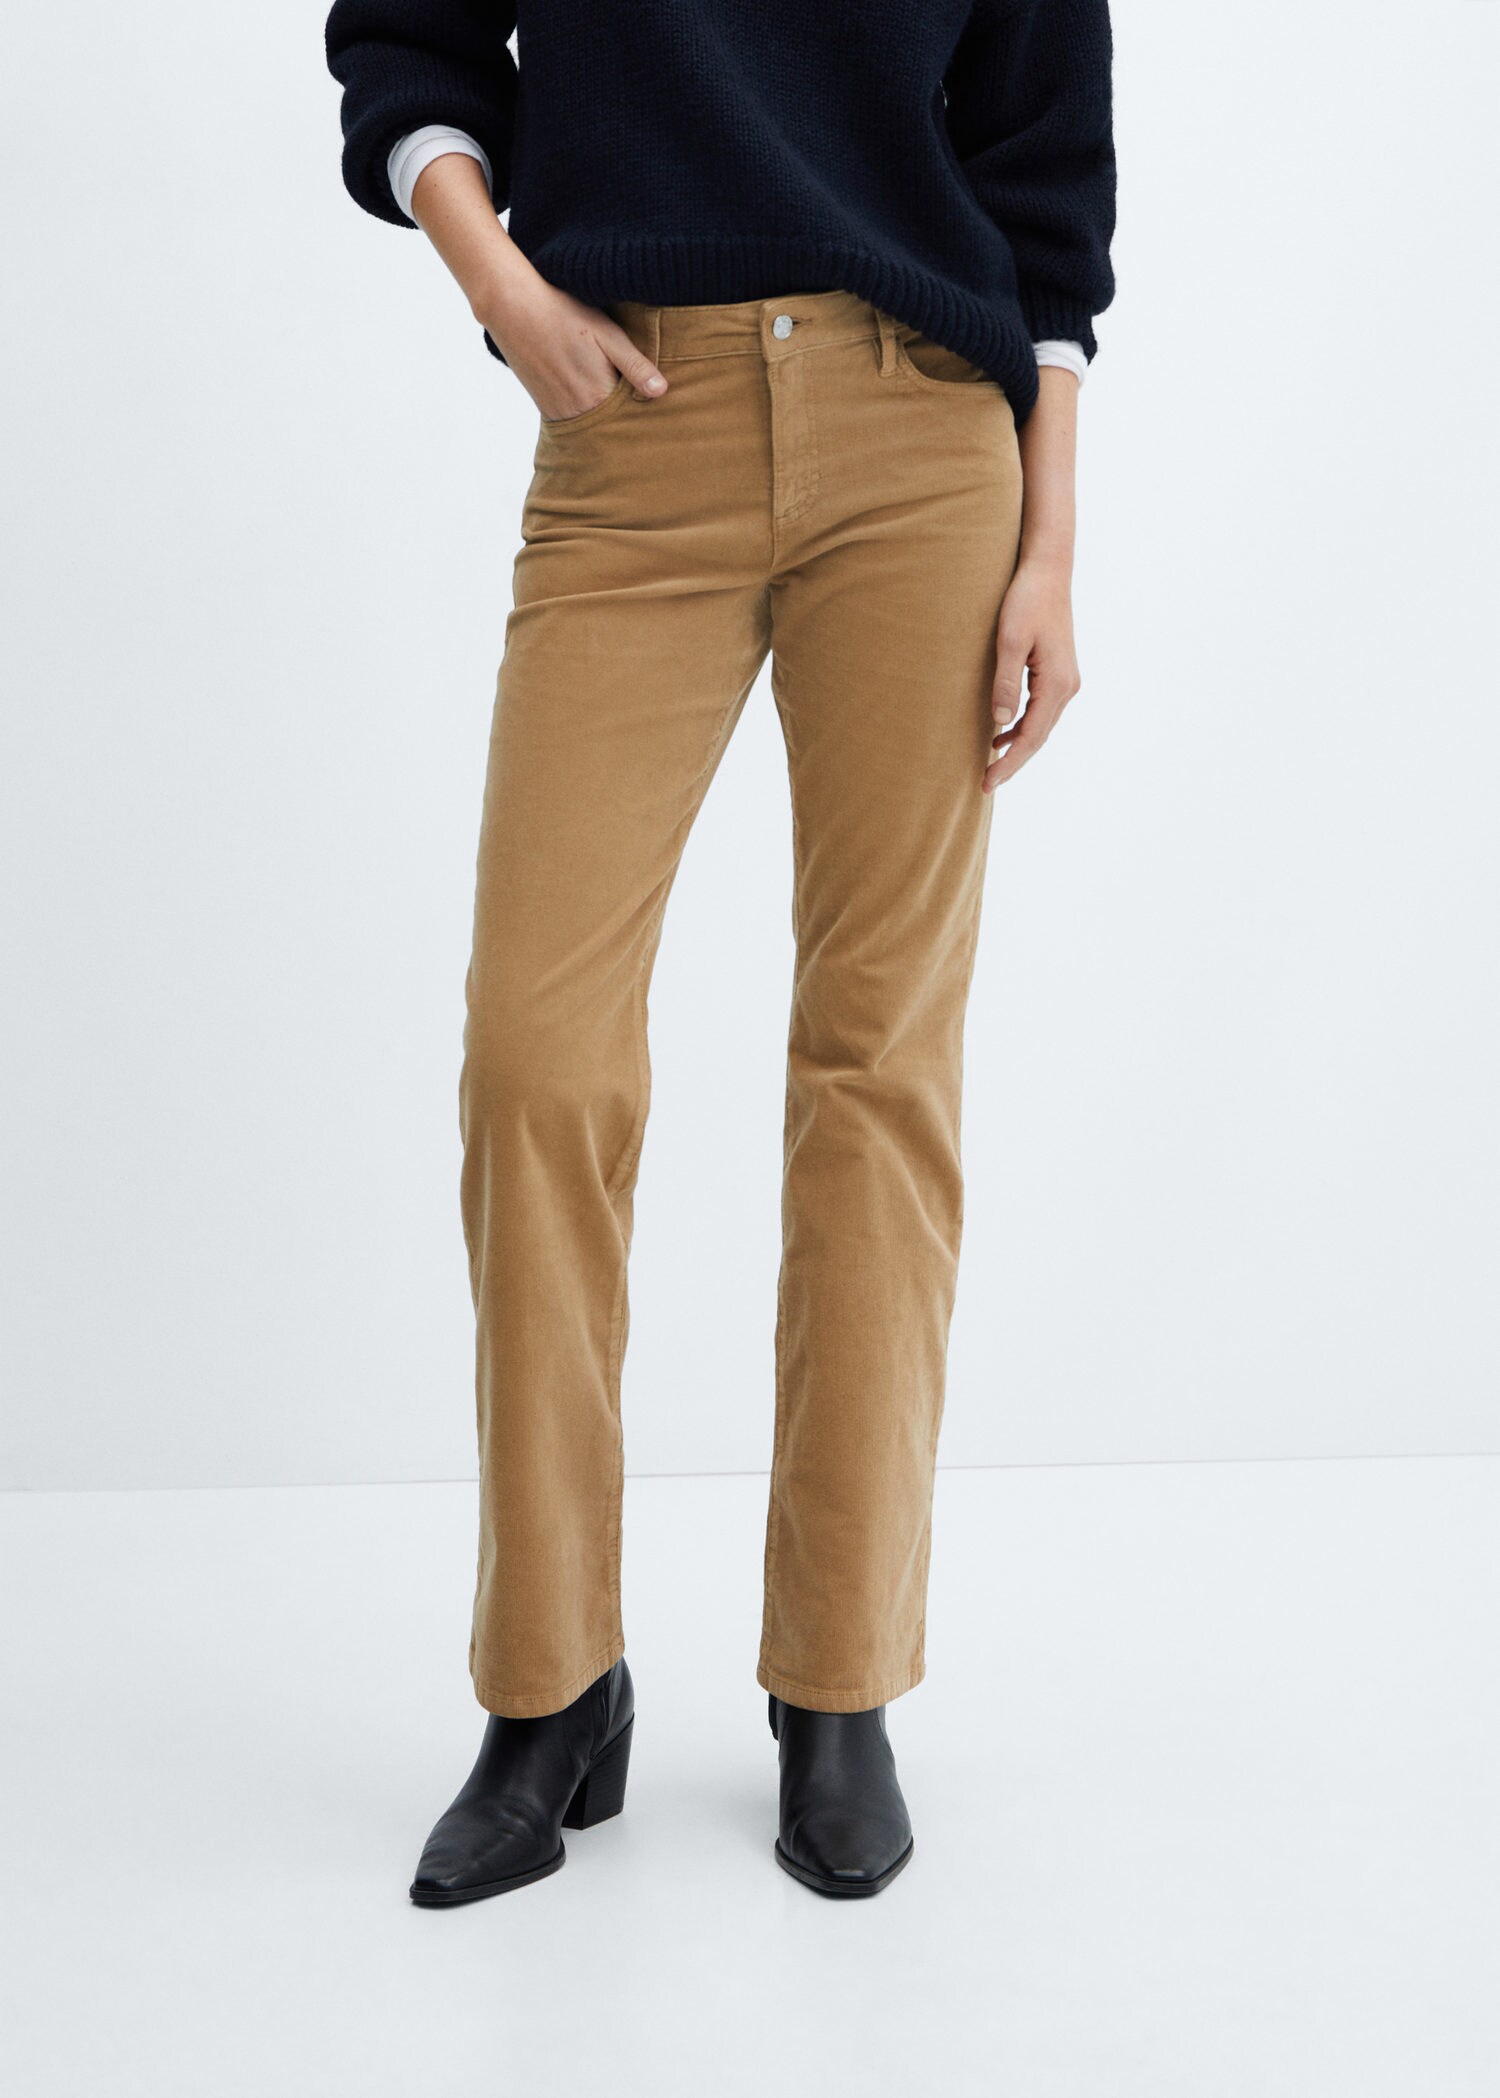 Corduroy: A Versatile Fall Trend - M Loves M | Pants outfit fall, Fashion  pants, Fall outfits pinterest